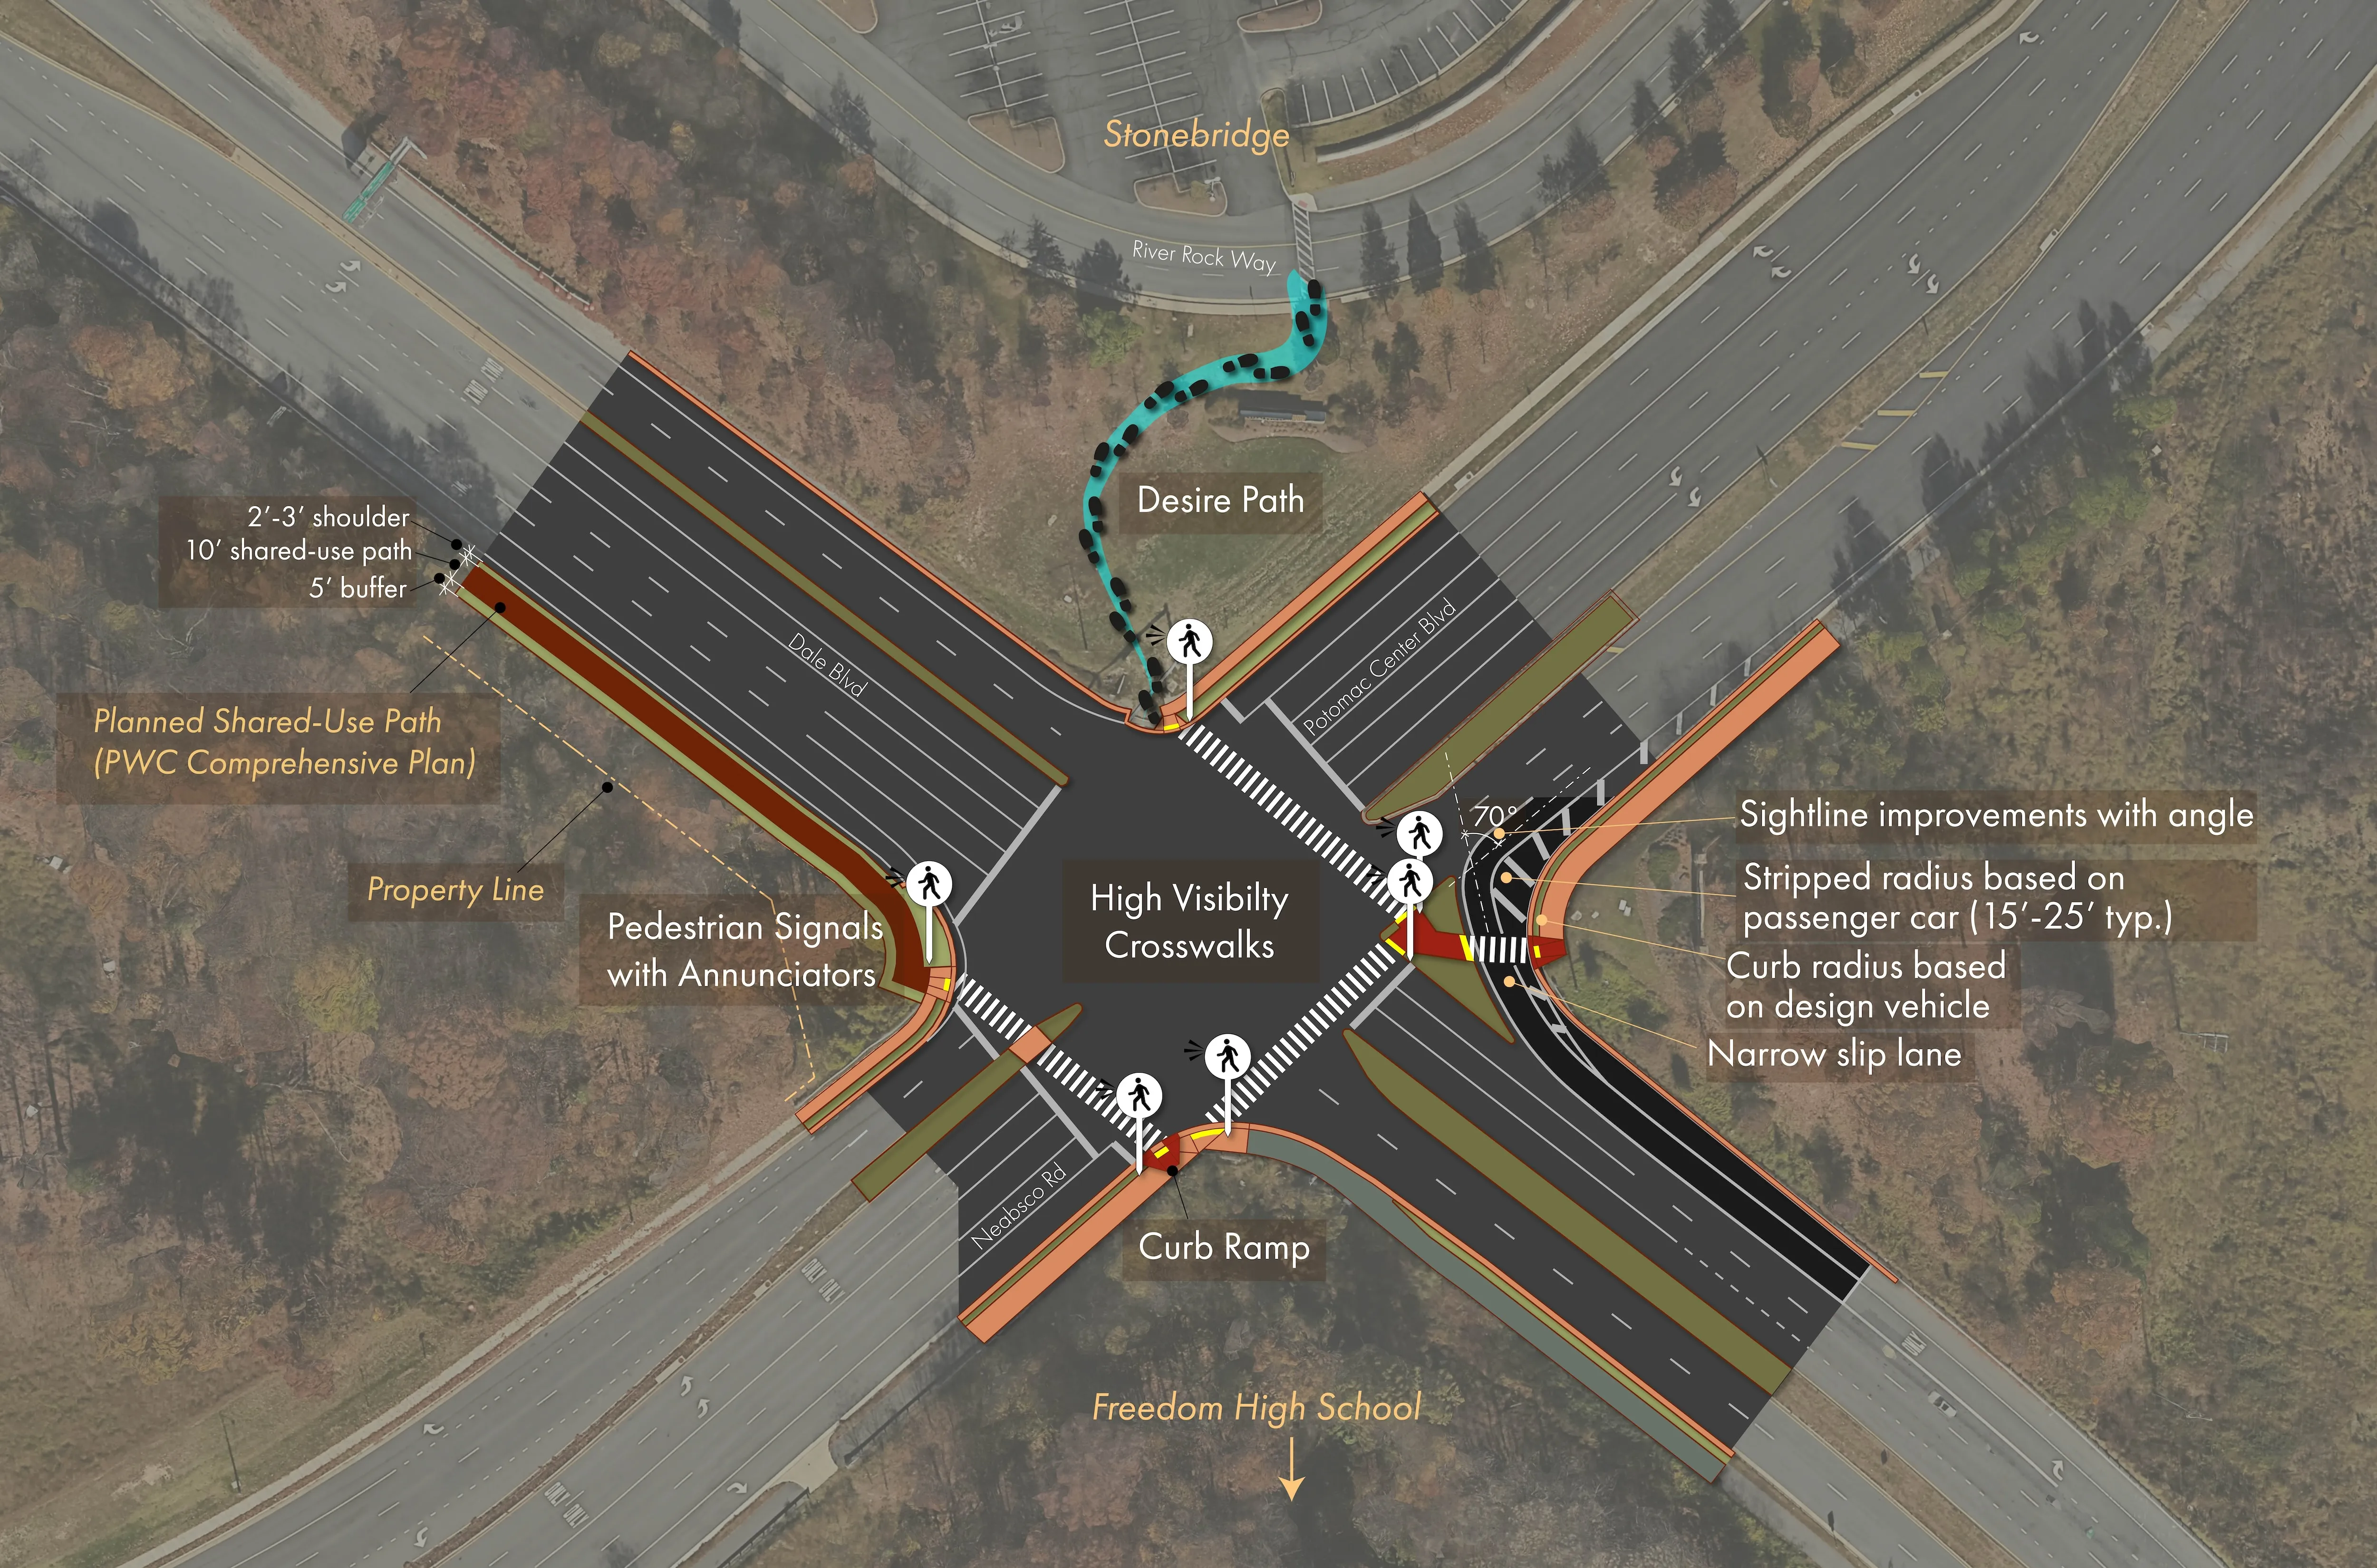 A map with overlaid schematic graphics showing accessibility and safety enhancements to the intersection near the planned commuter garage and transit center. Enhancements are labeled: Pedestrian signals with annunciators, curb ramps, high-visibility crosswalks, a slip lane, and shared-use paths.